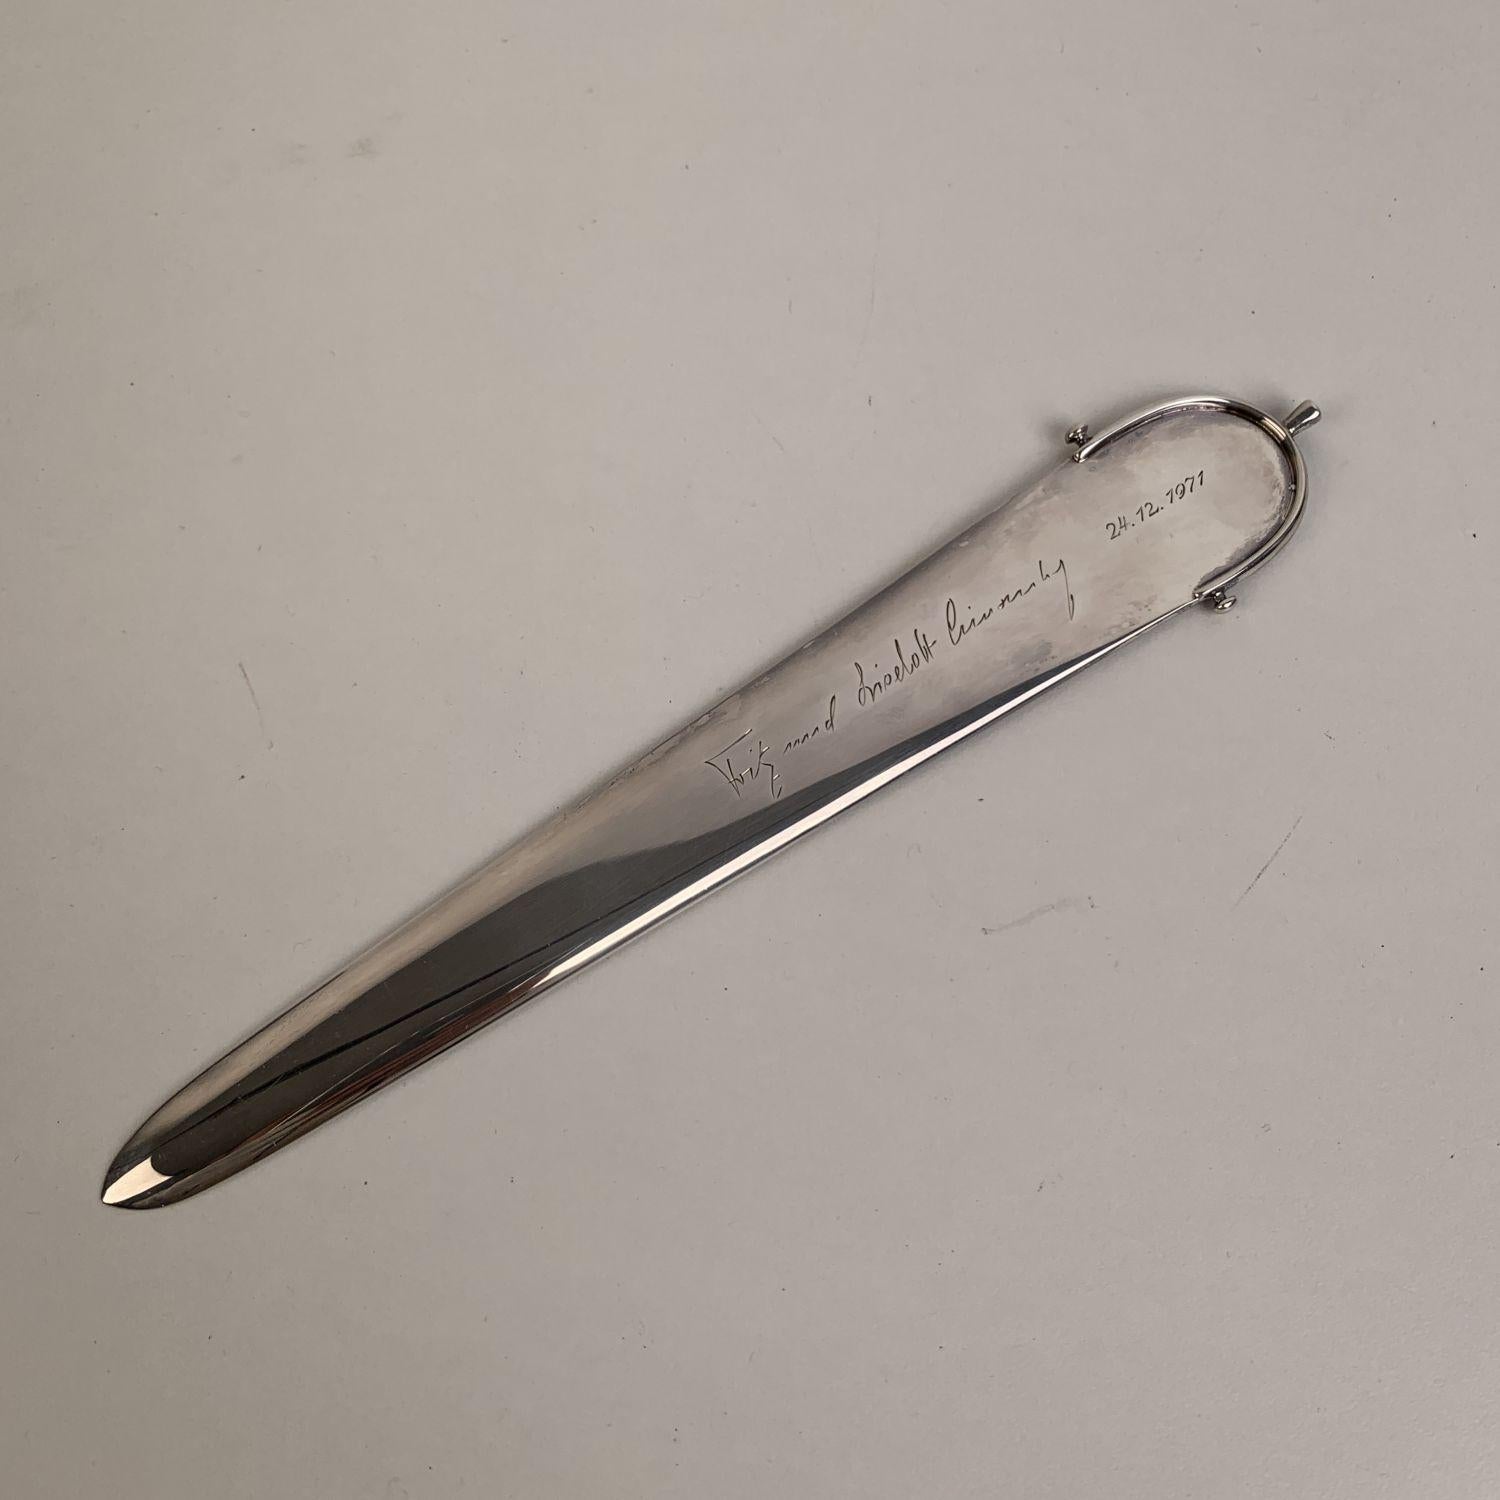 Vintage Hermes Letter opener in silver plate. Spur detailing. The letter opener is personalized with and egraved dedication and a date. Total lenght: 9 inches - 23 cm. 'Hermes Paris' engraved on the back. Halmark engraved on the